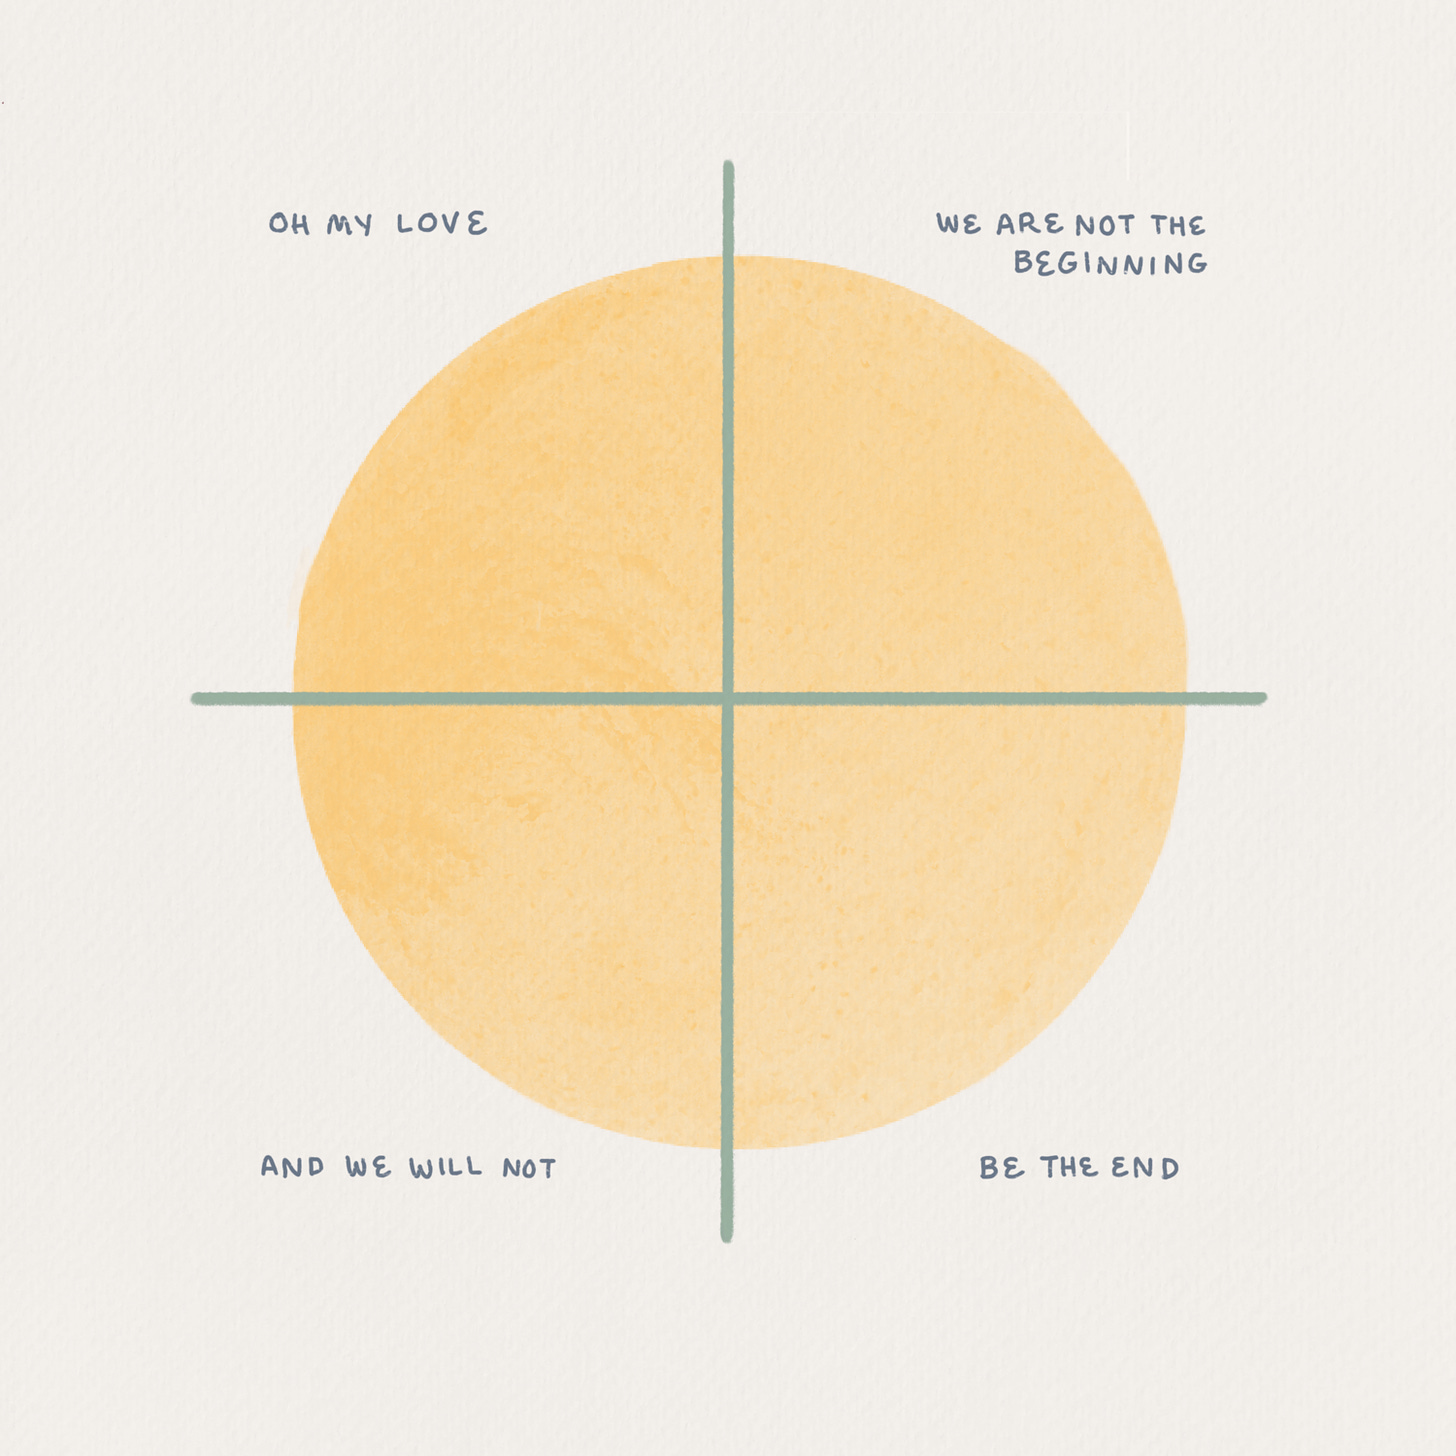 Text: Oh my love, we are not the beginning. And we will not be the end. Image: An enormous yellow sun